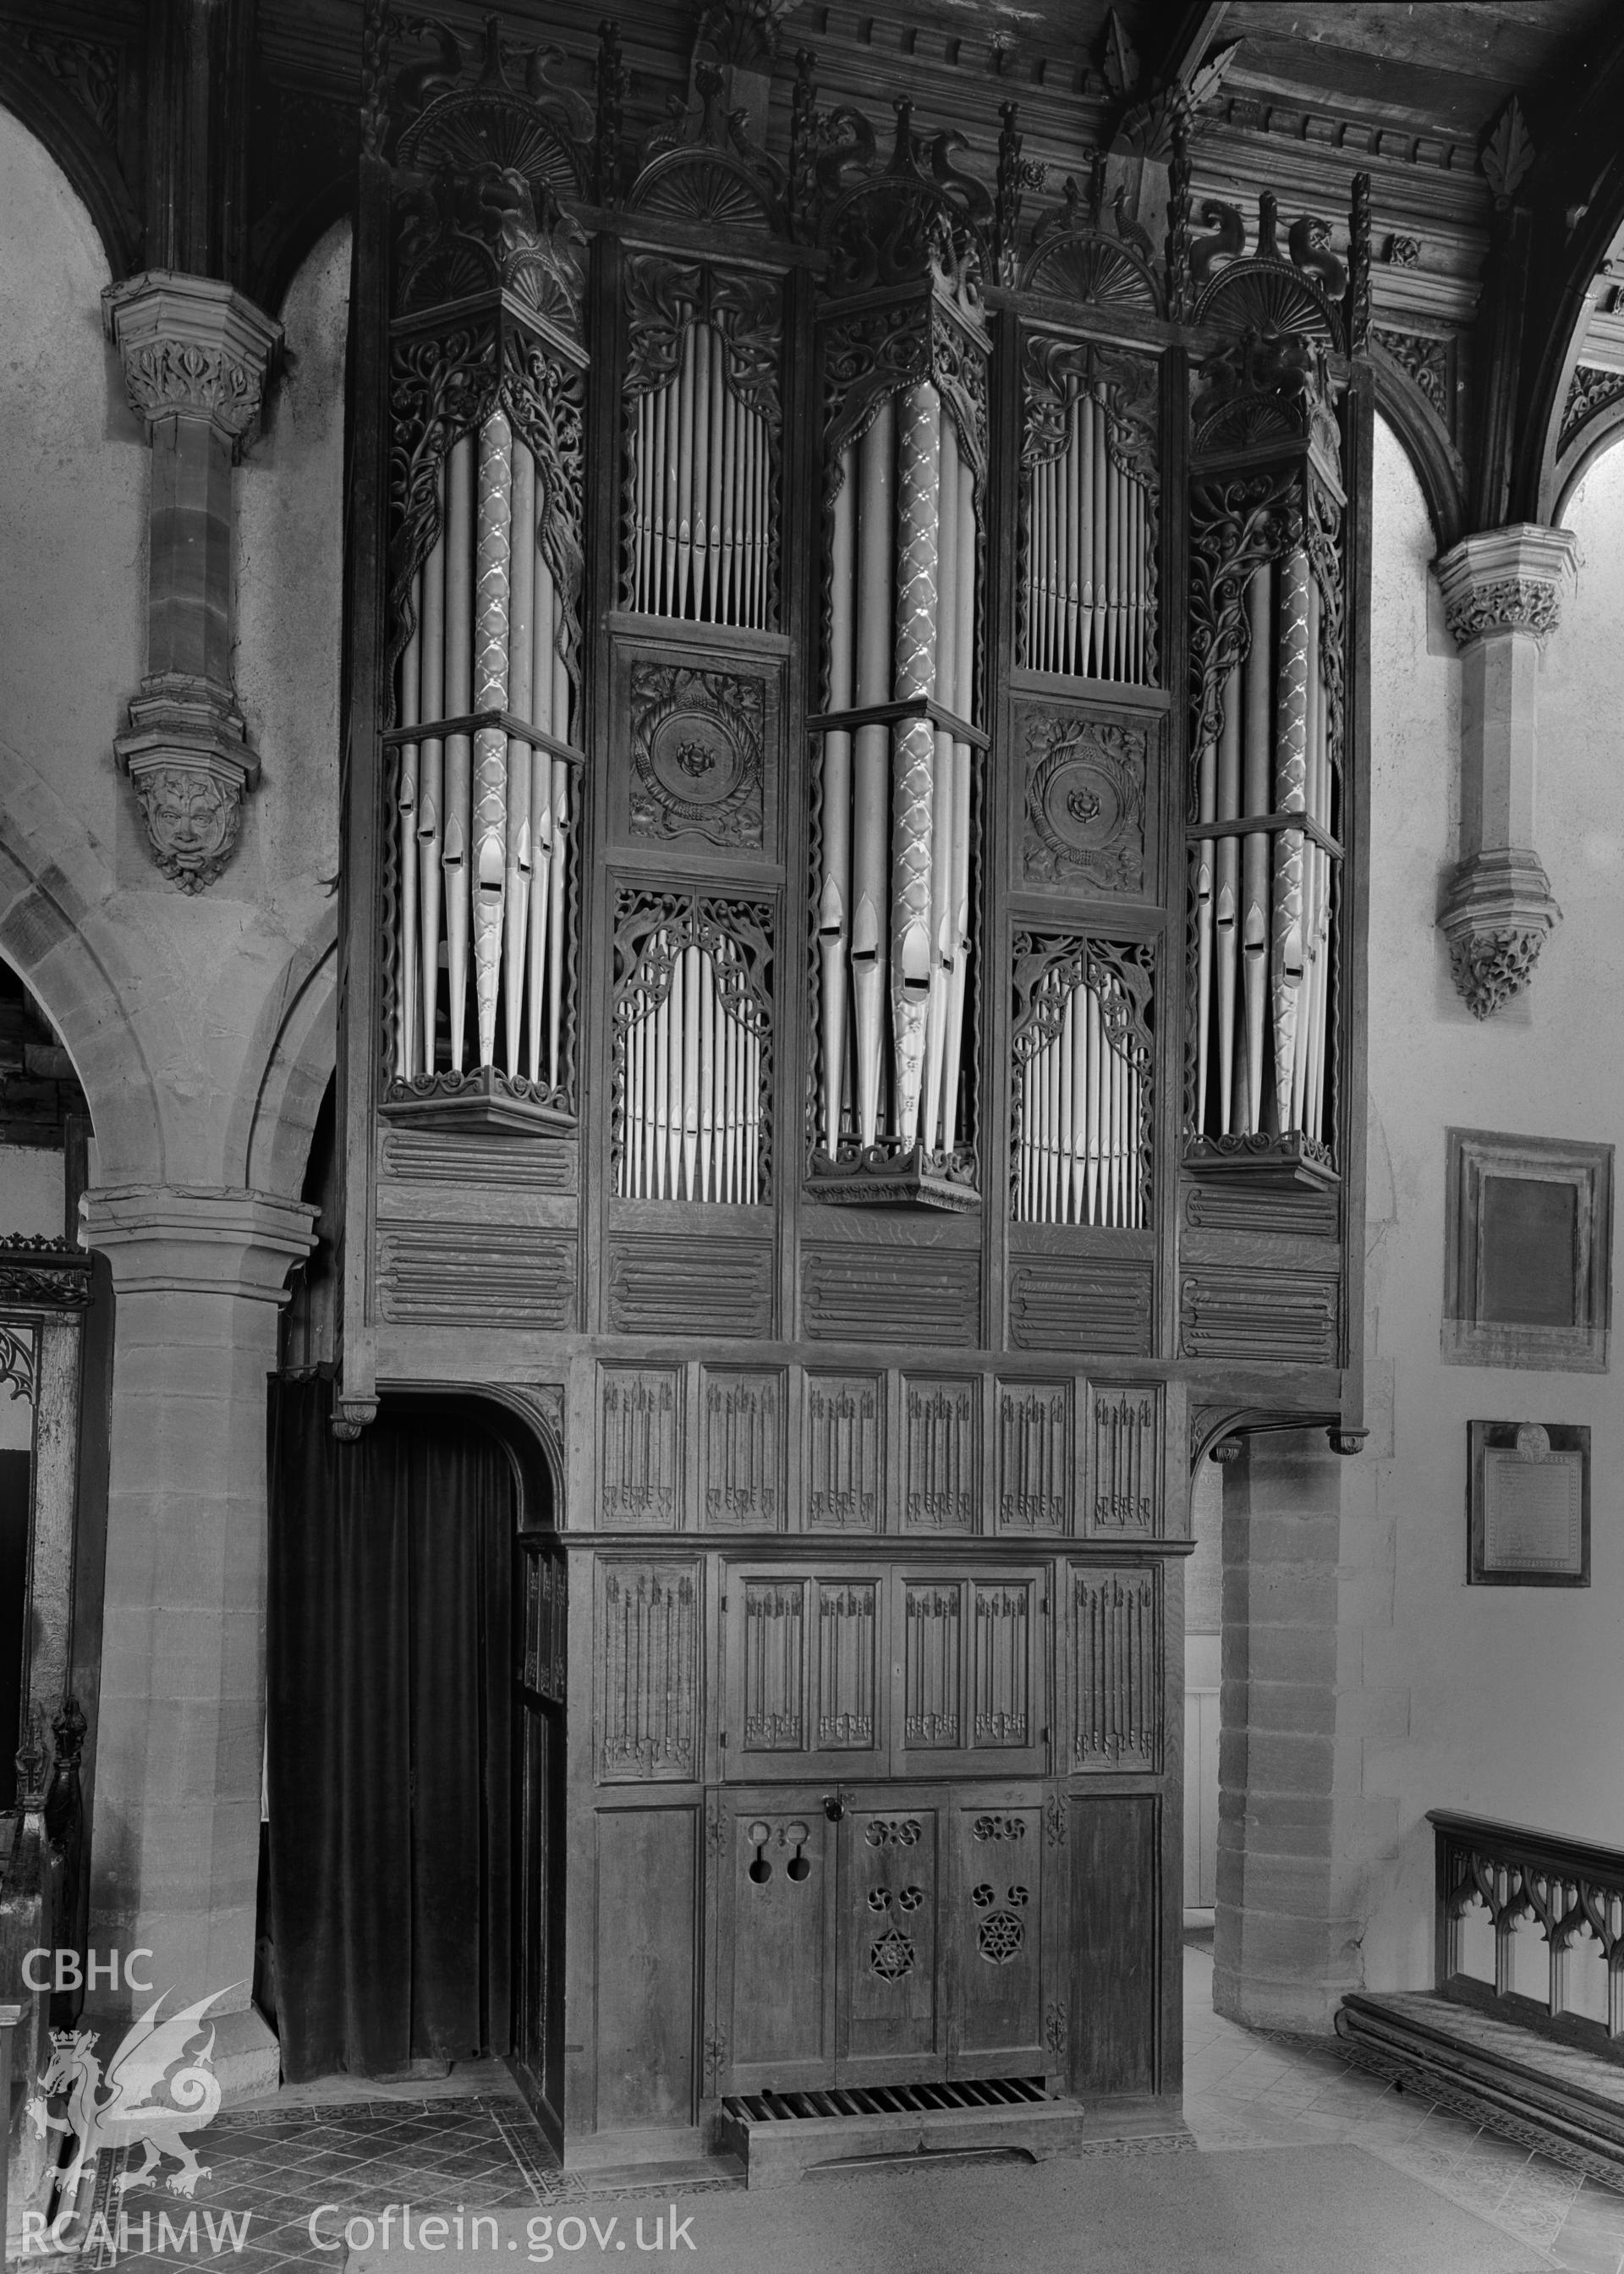 View of the organ at Old Radnor Church.